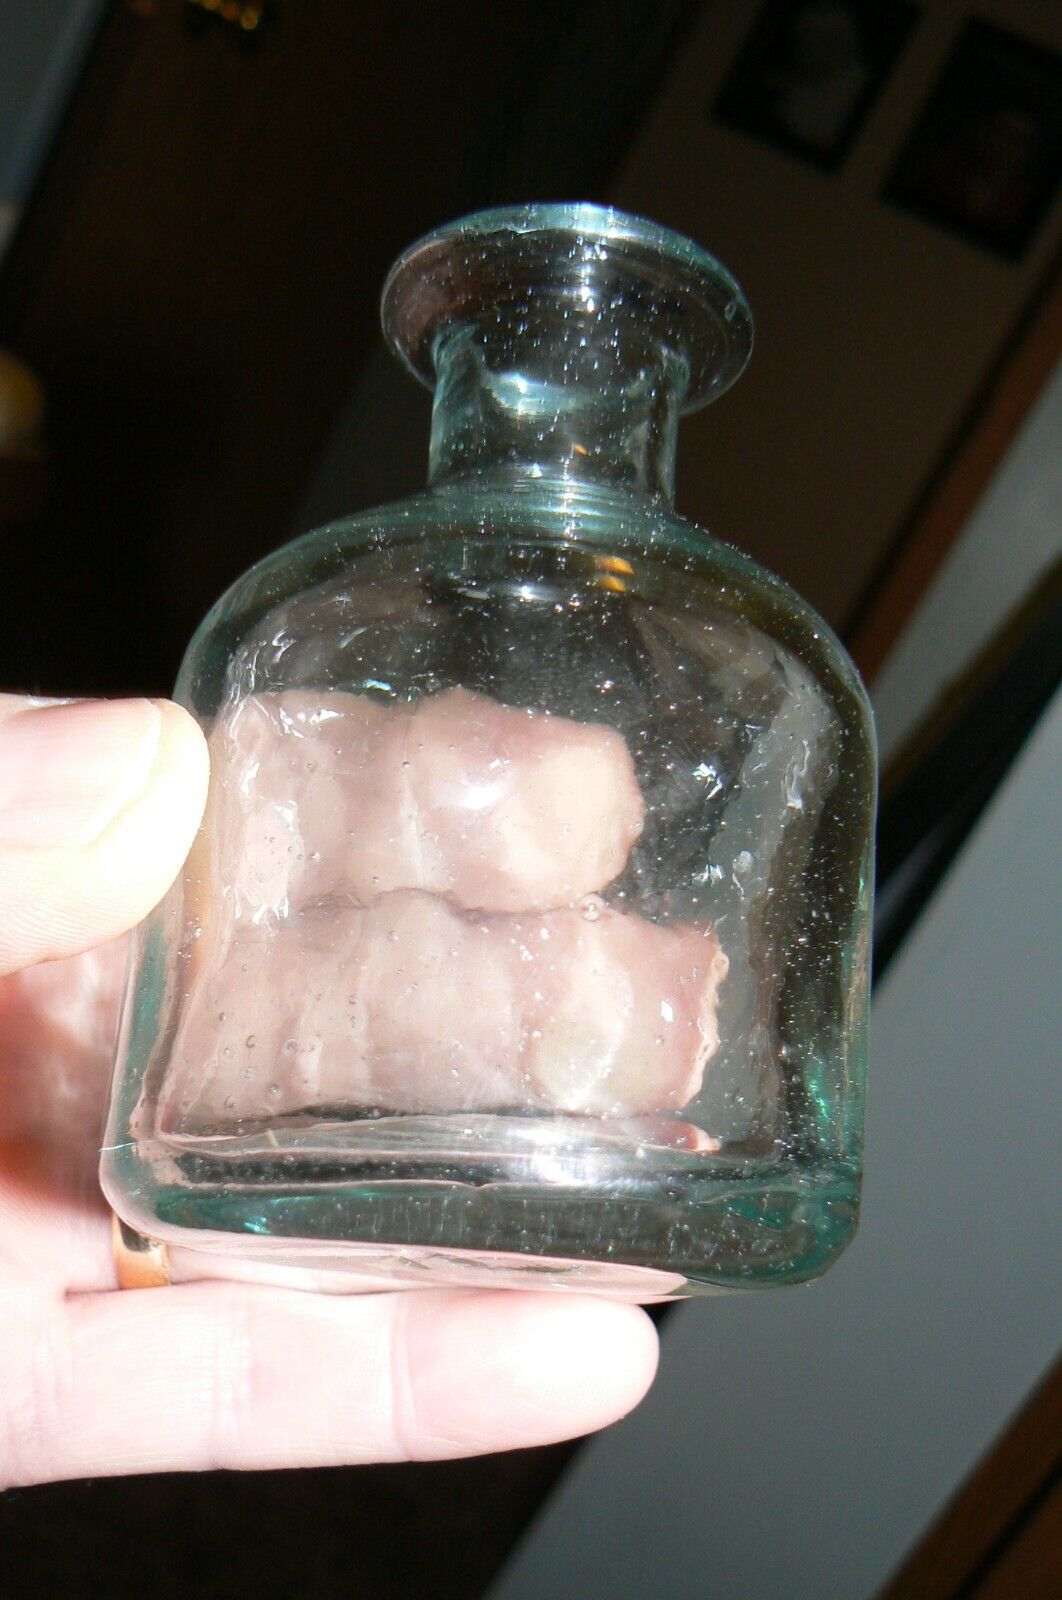 RARE EARLY 1830 FLARED LIP PONTIL INK OR MEDICINE BOTTLE 1000s OF TINY BUBBLES.